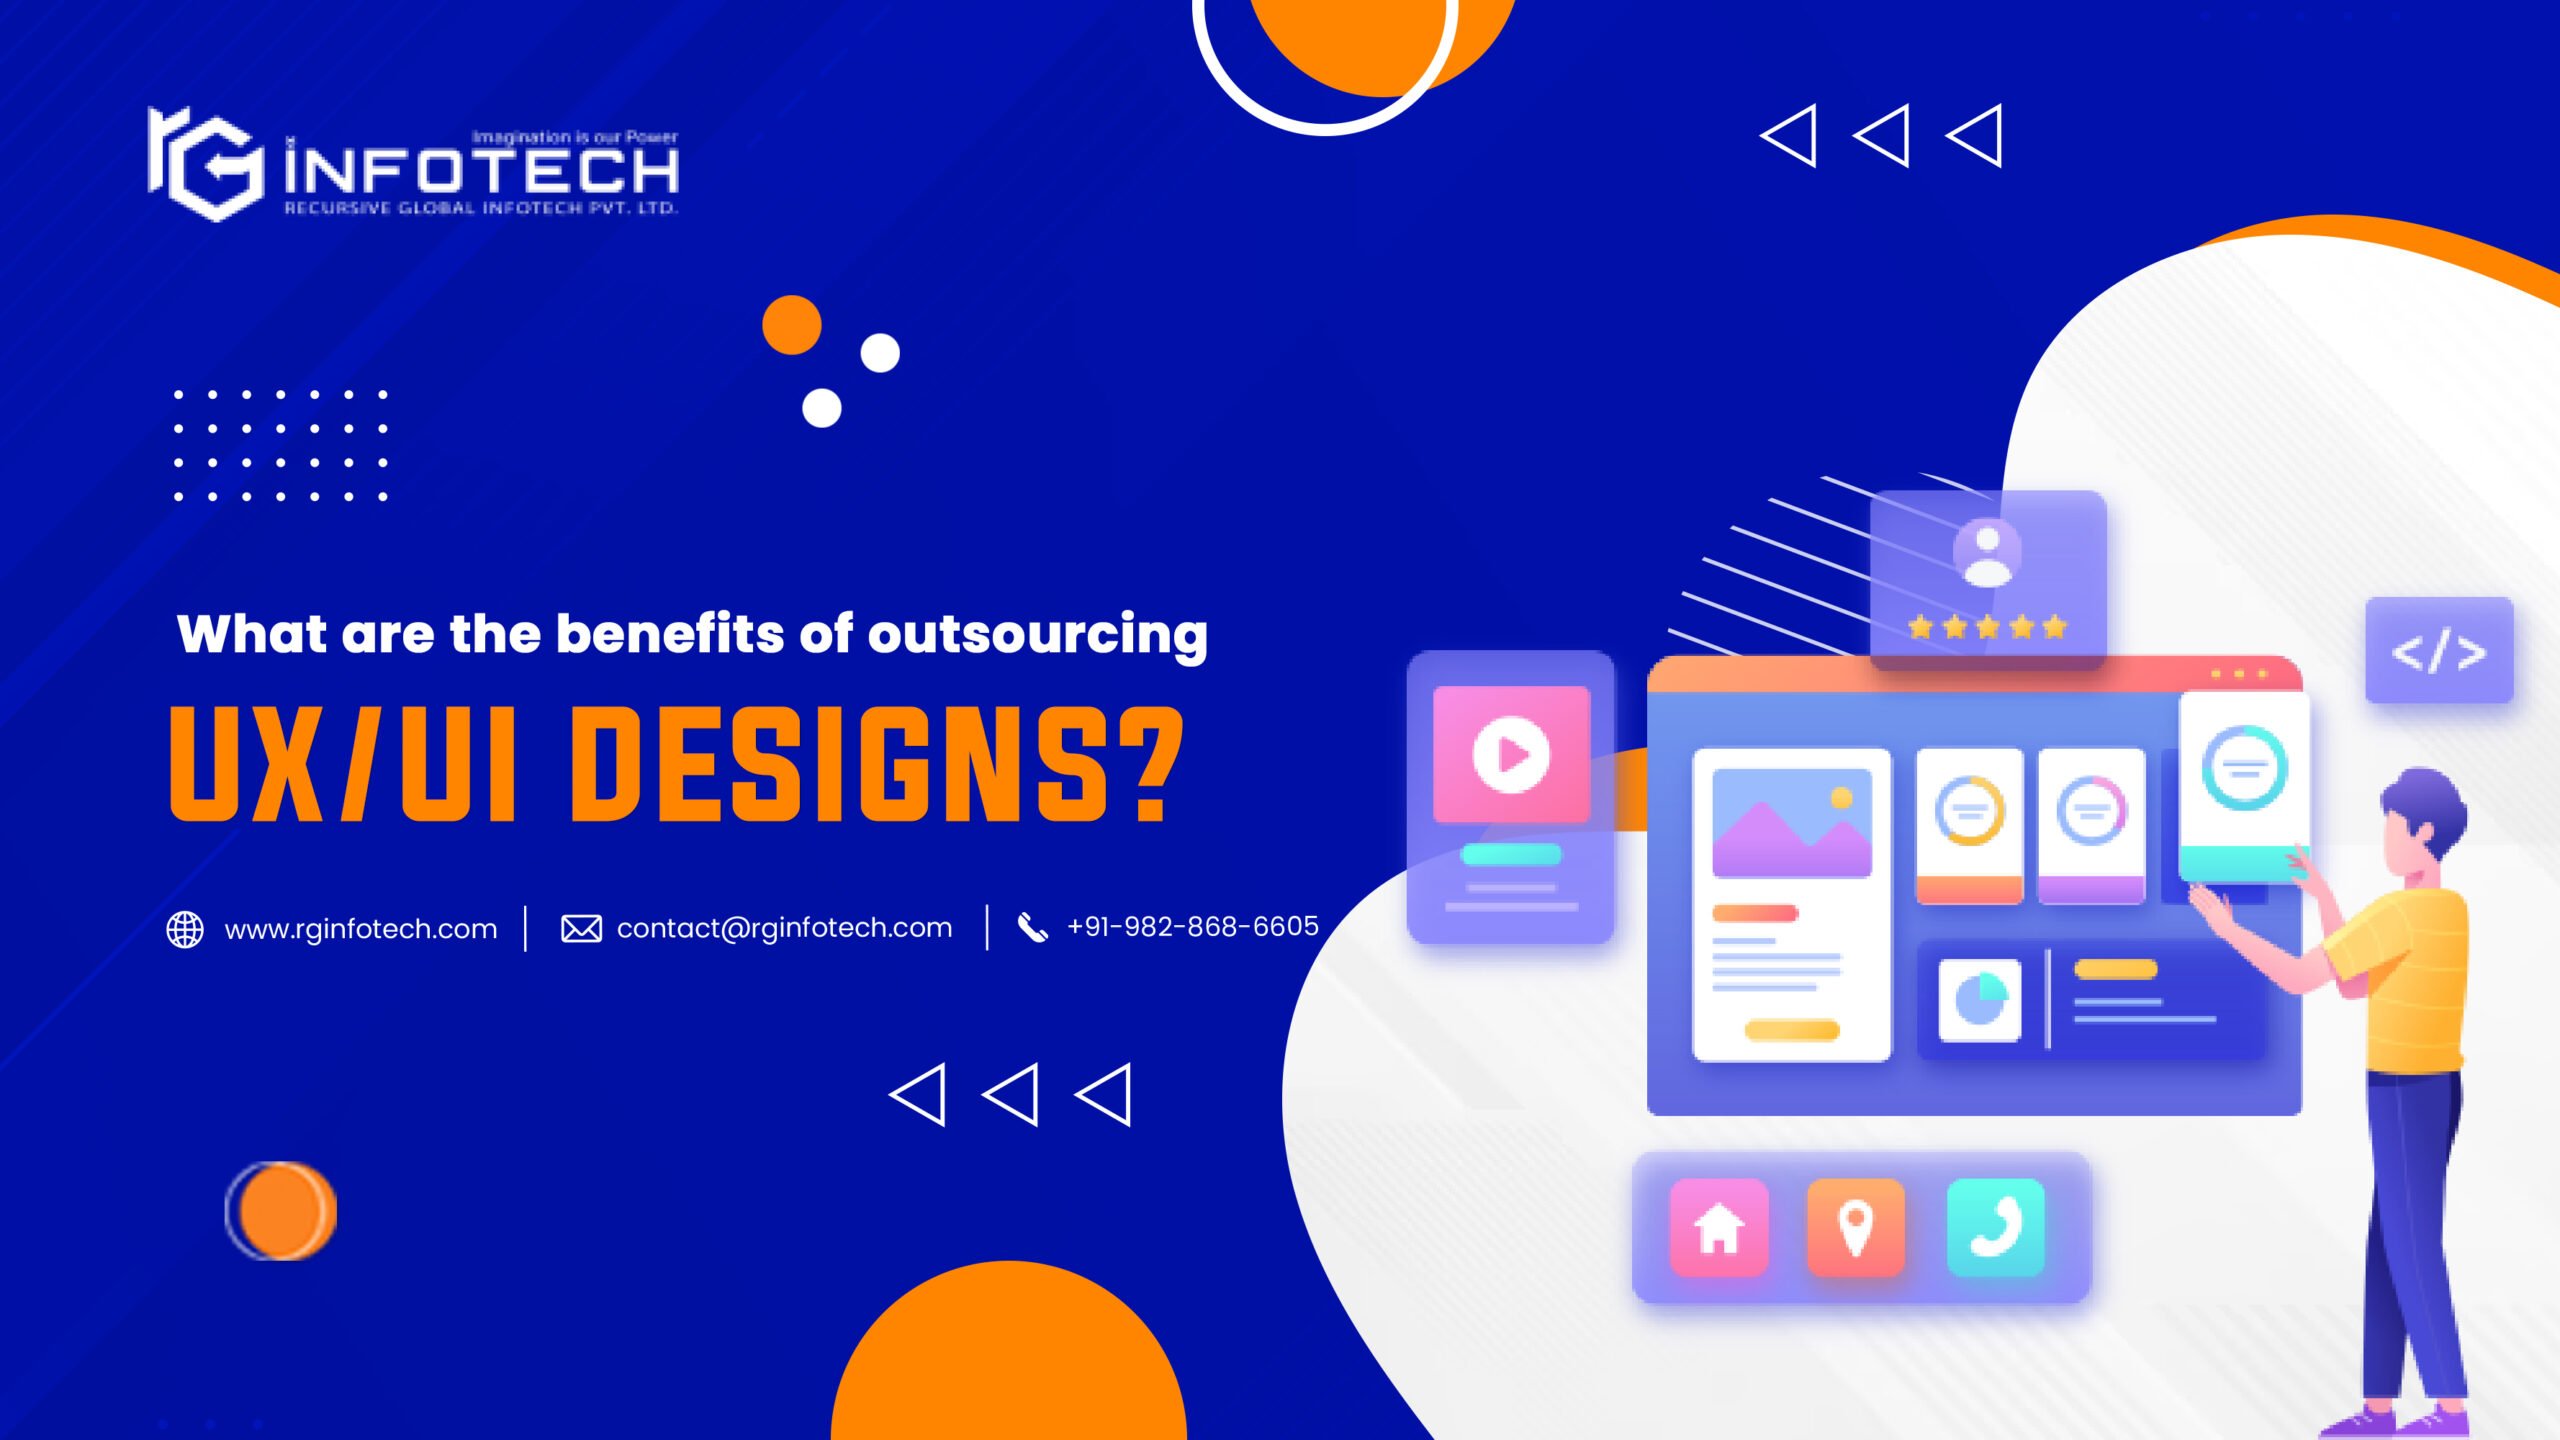 What are the benefits of outsourcing UX/UI designs